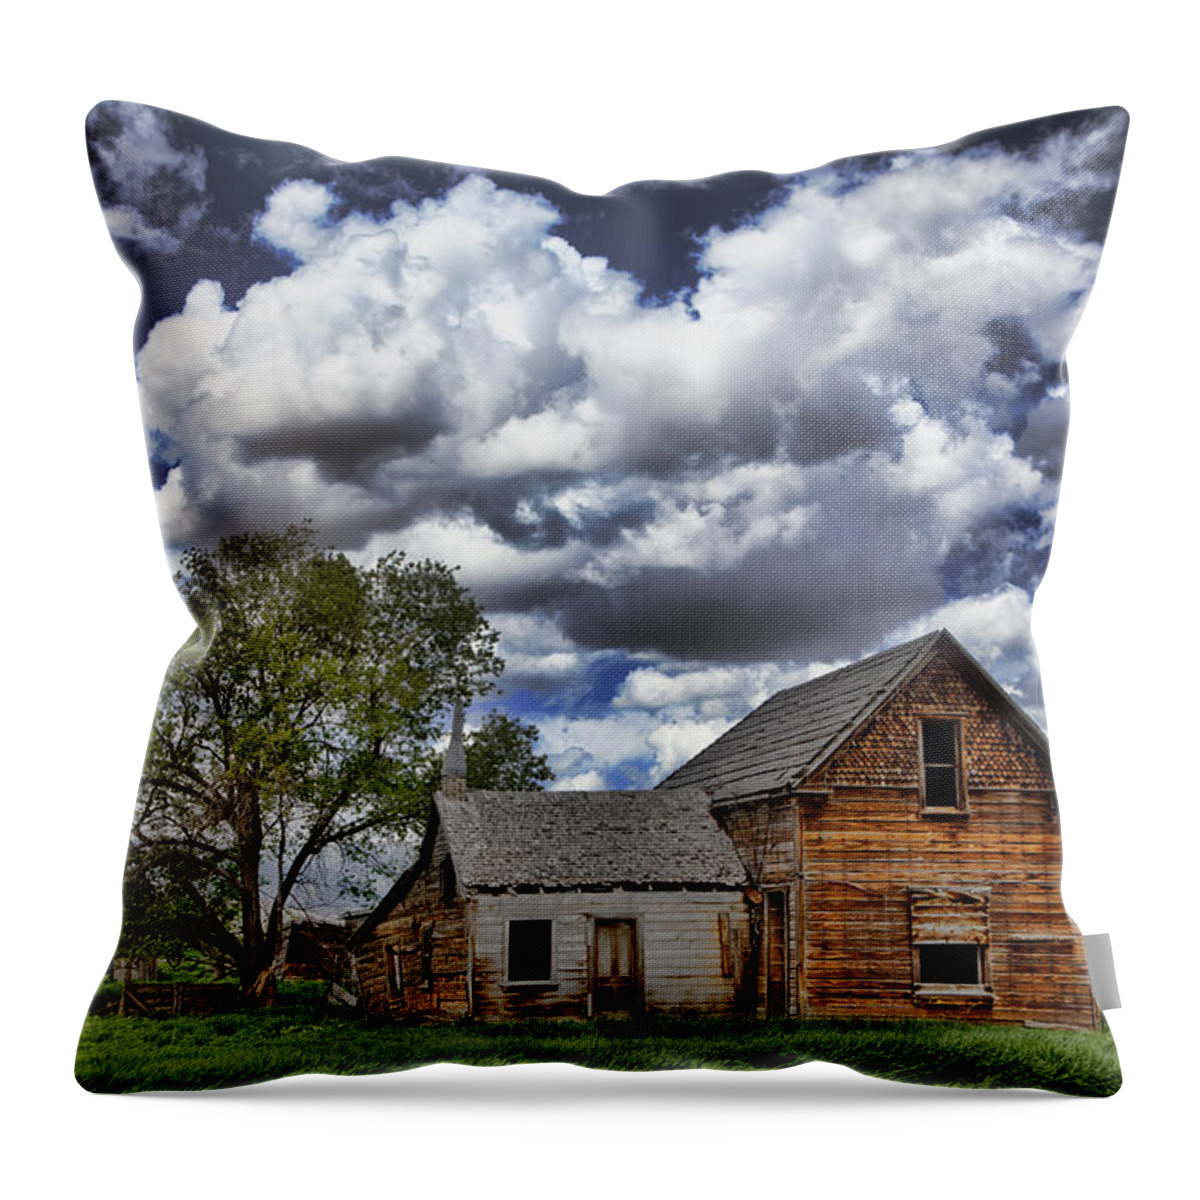 Americana Throw Pillow featuring the photograph Americana by Mark Smith